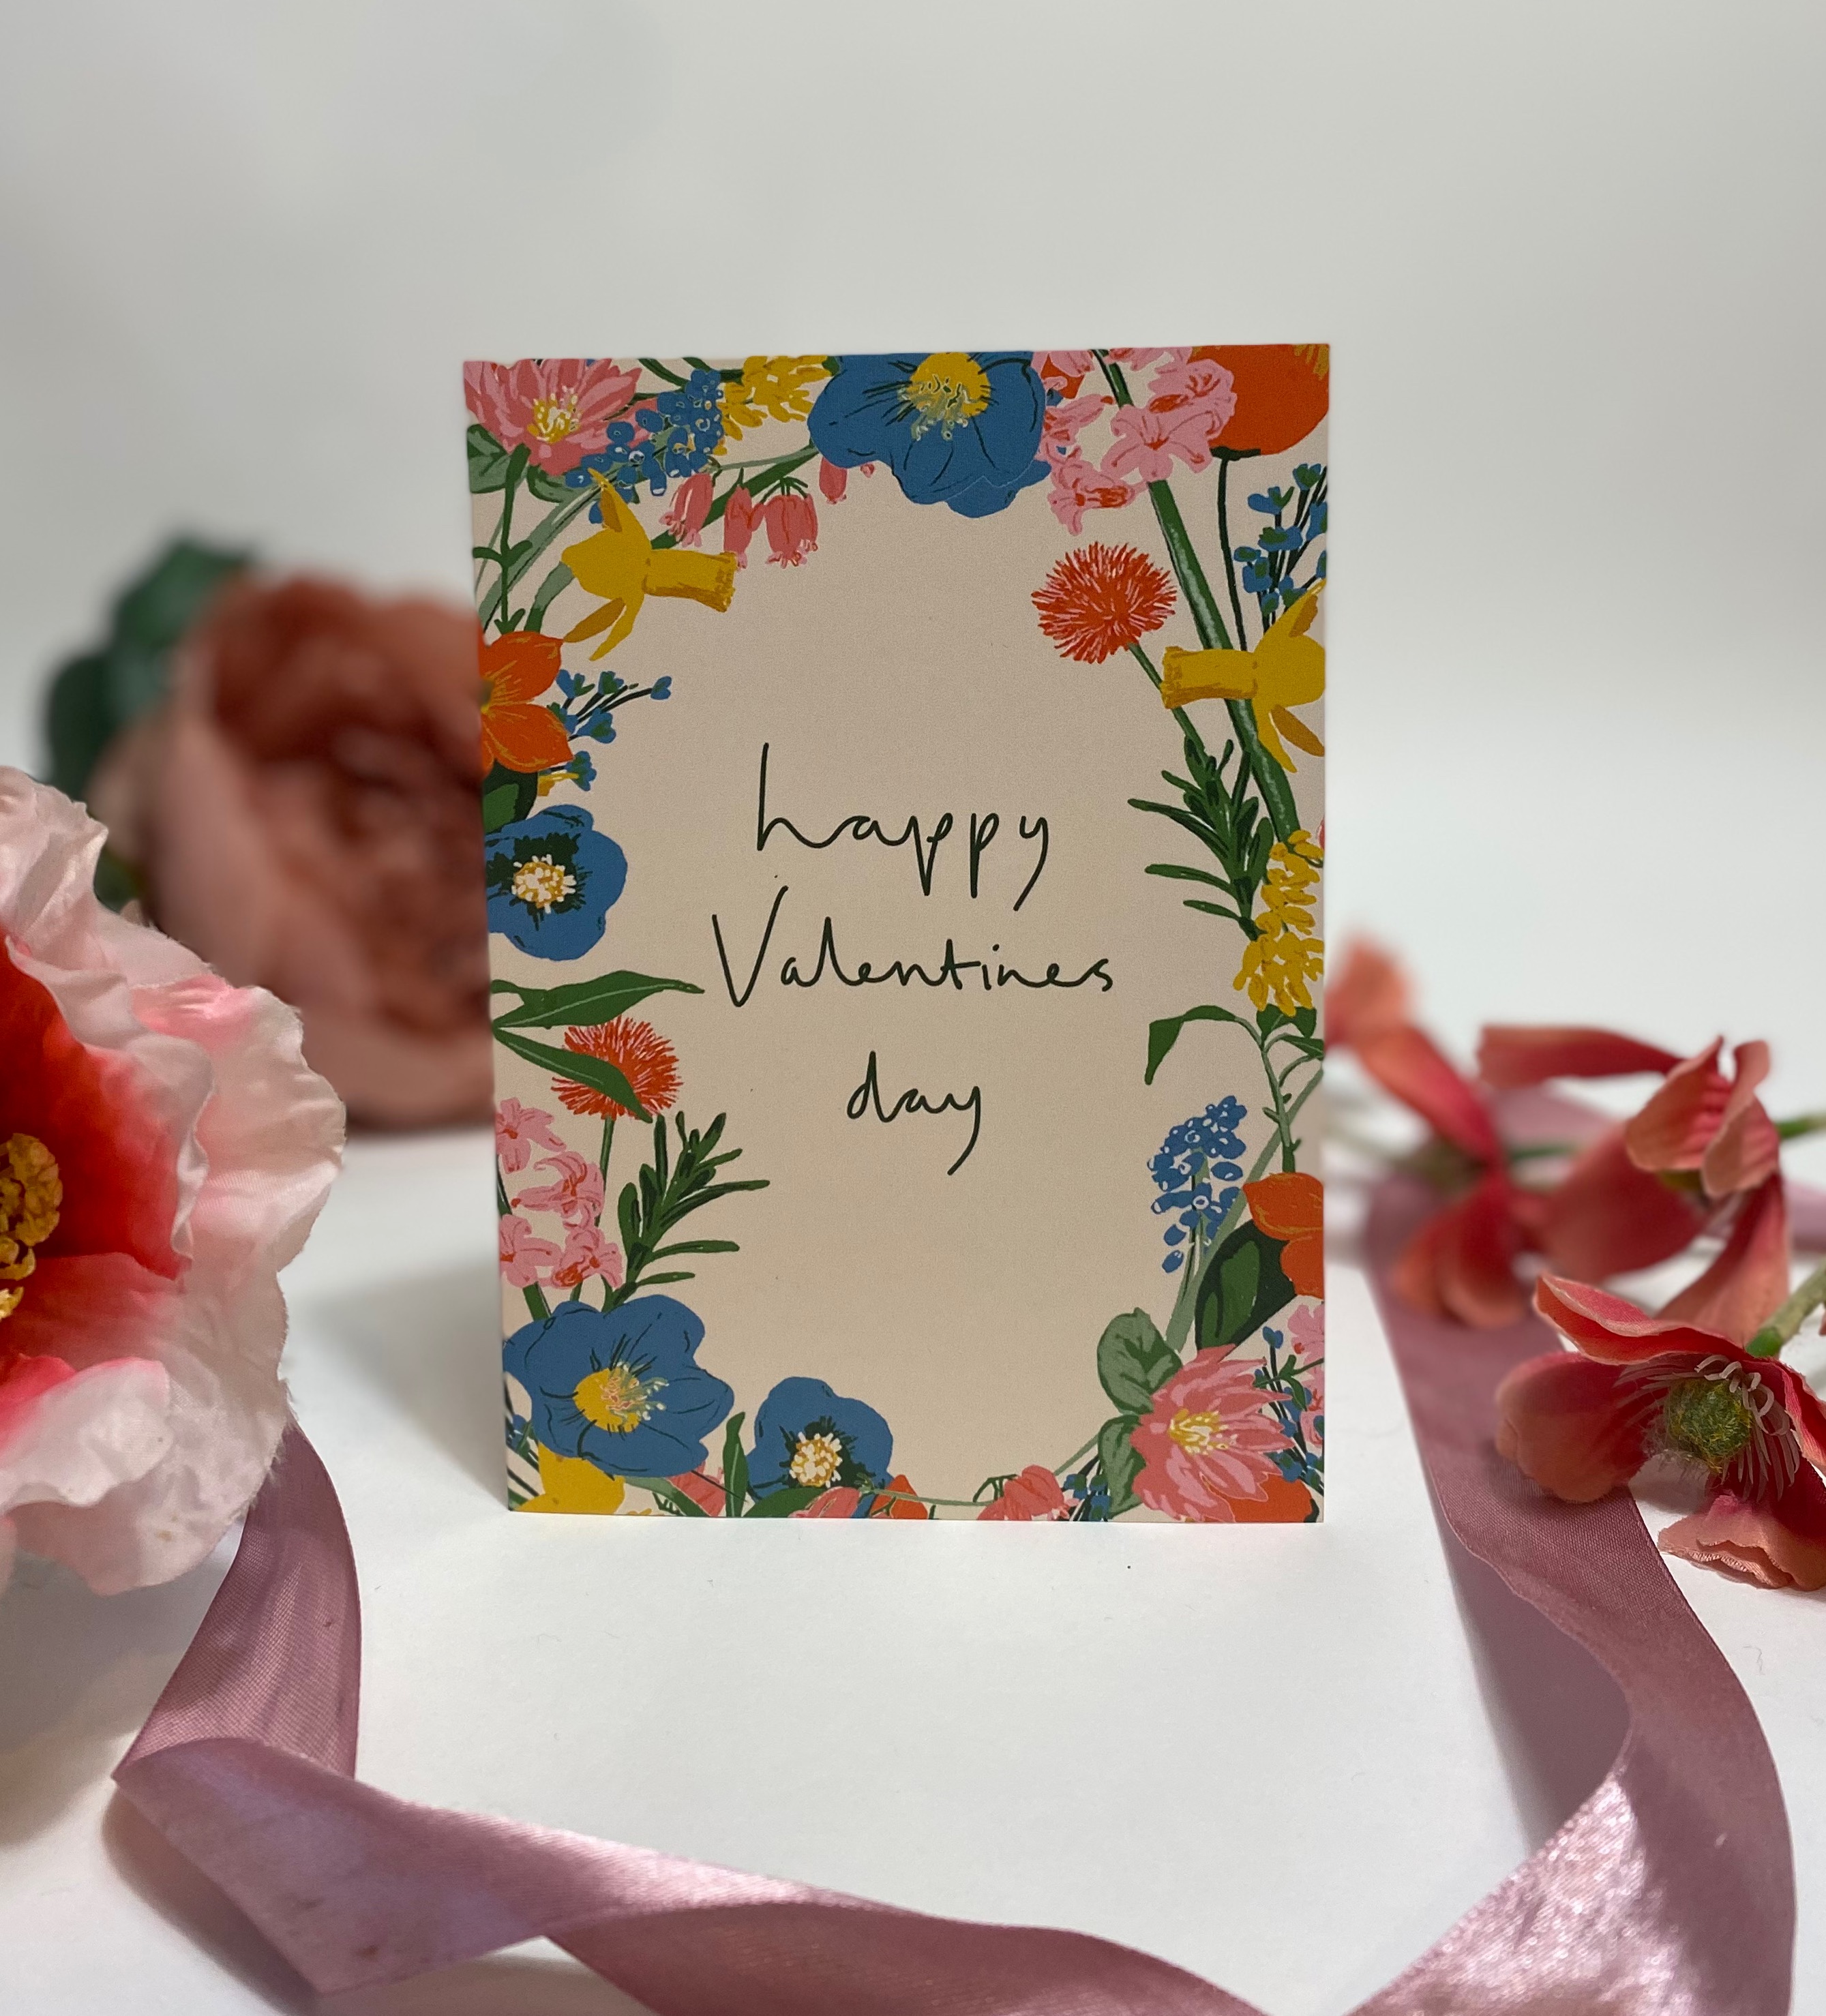 Happy Valentine’s Day greetings card with FREE biodegradable heart tissue confetti inside LMV007